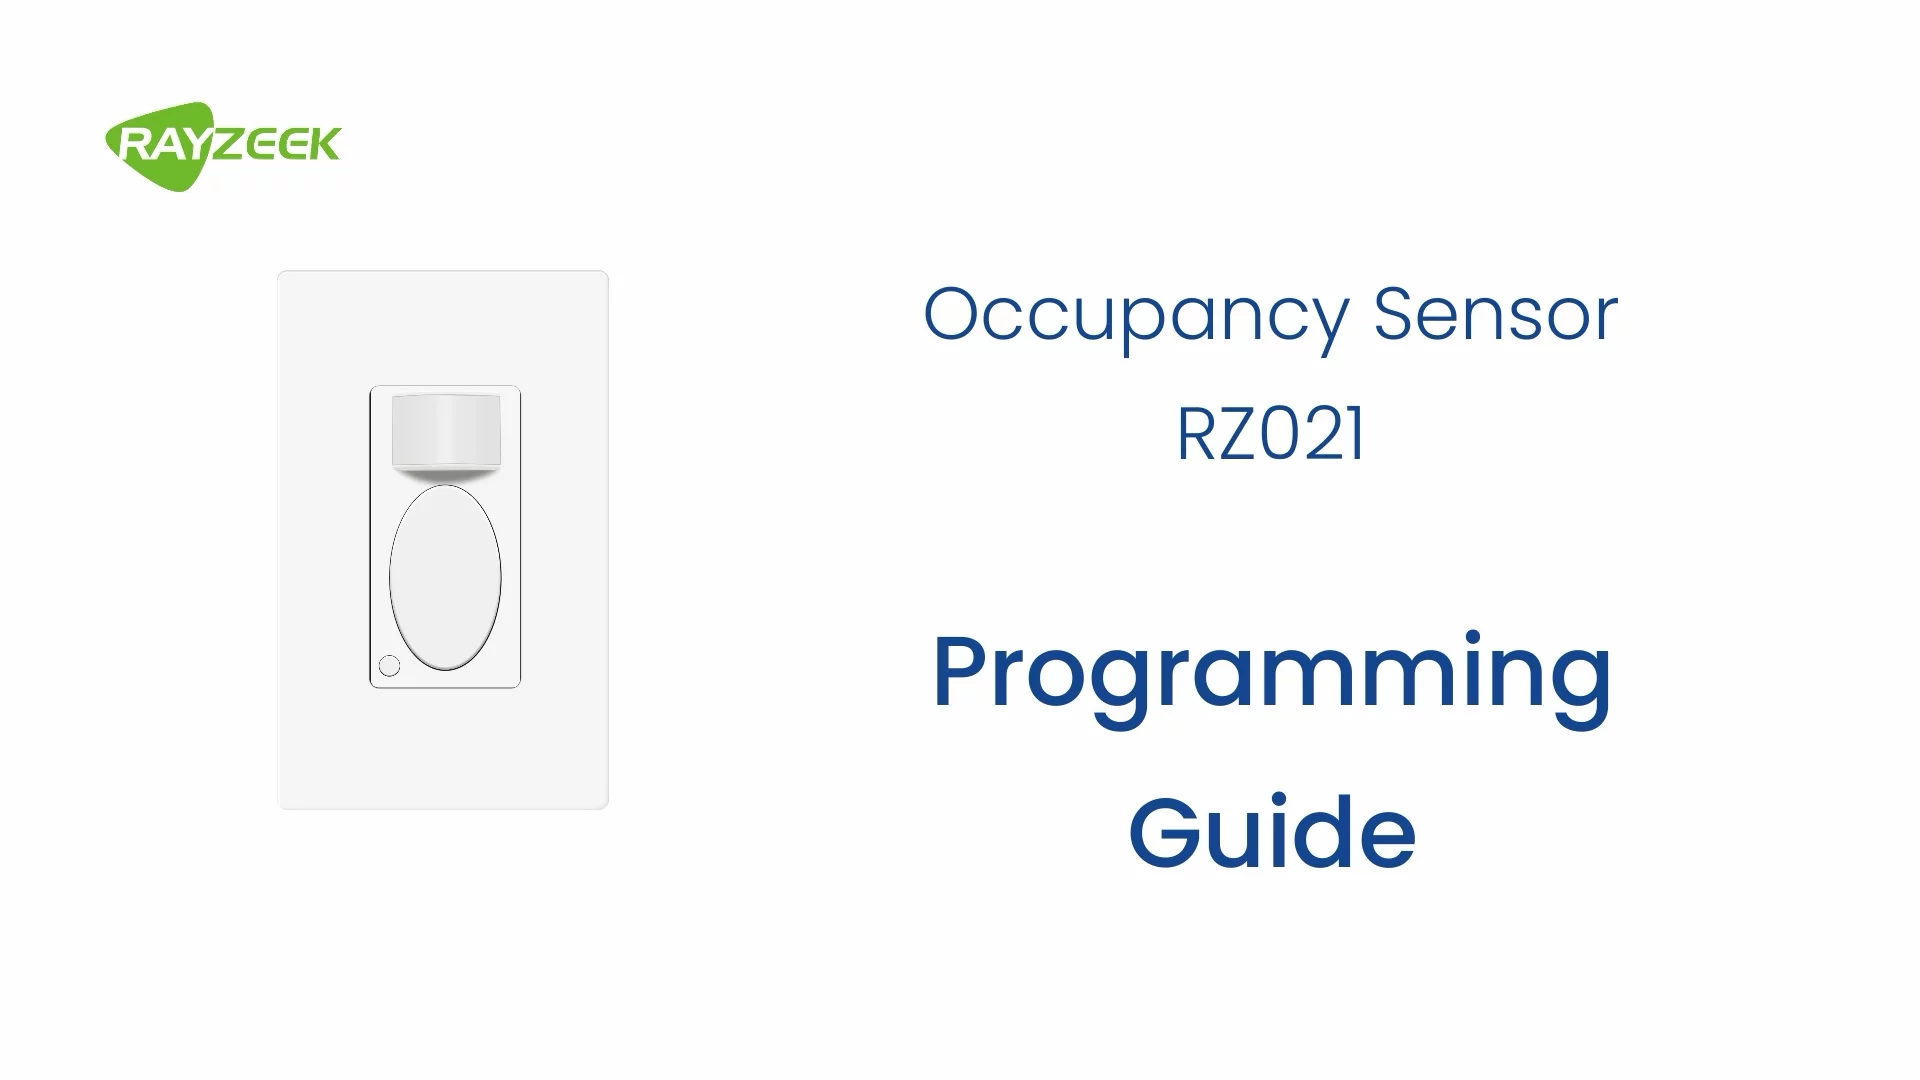 Occupancy / Vacancy / Manual Motion Sensor Switch, No Neutral Required